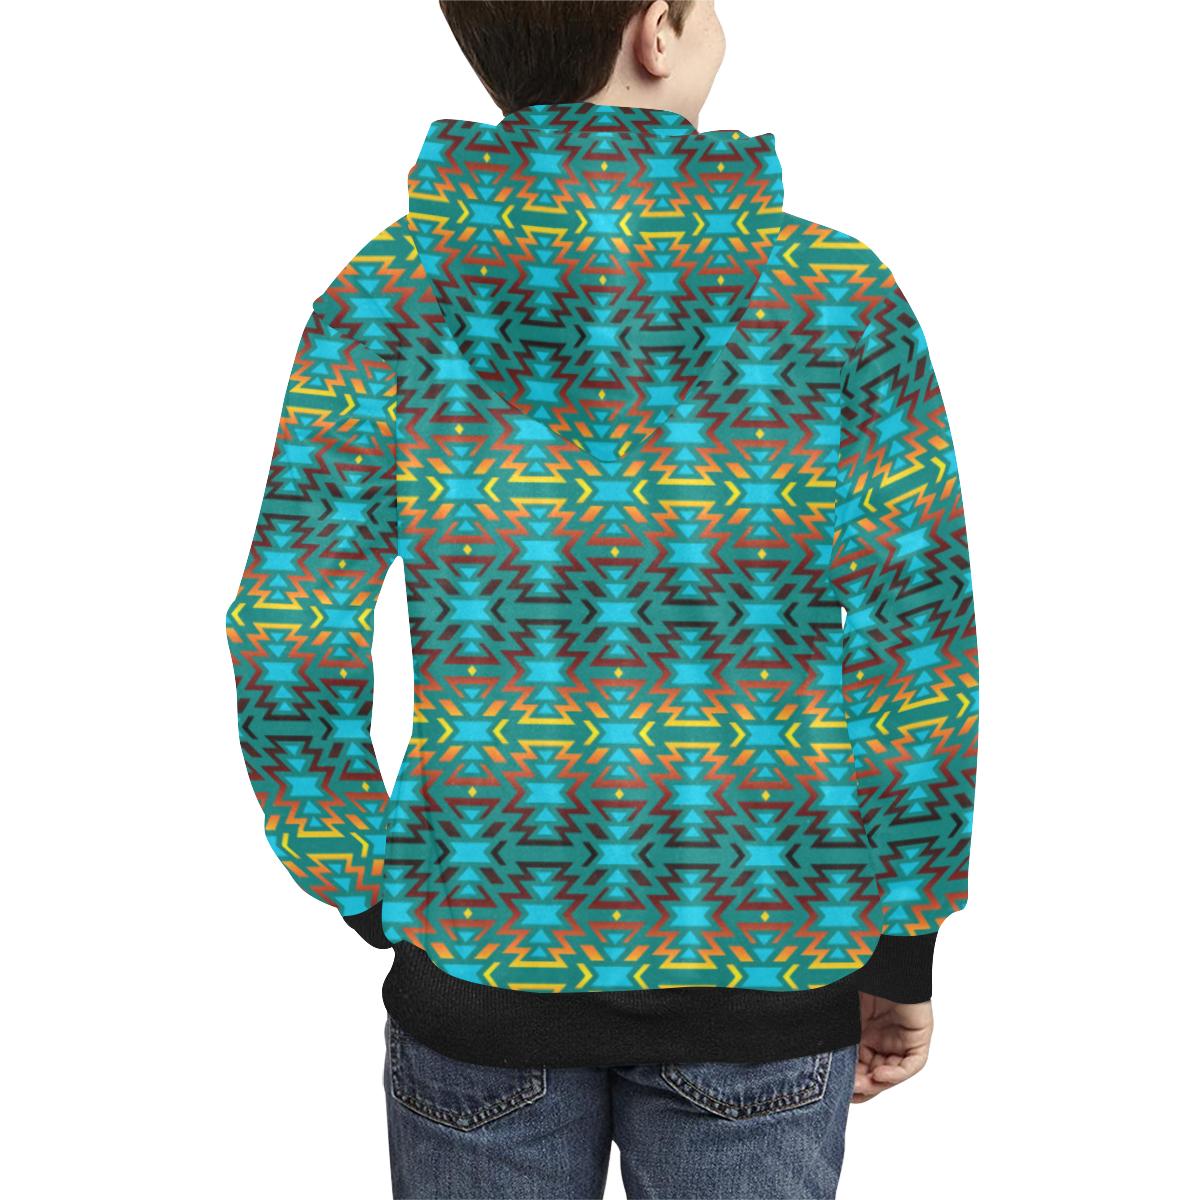 Fire Colors and Turquoise Teal Kids' All Over Print Hoodie (Model H38) Kids' AOP Hoodie (H38) e-joyer 